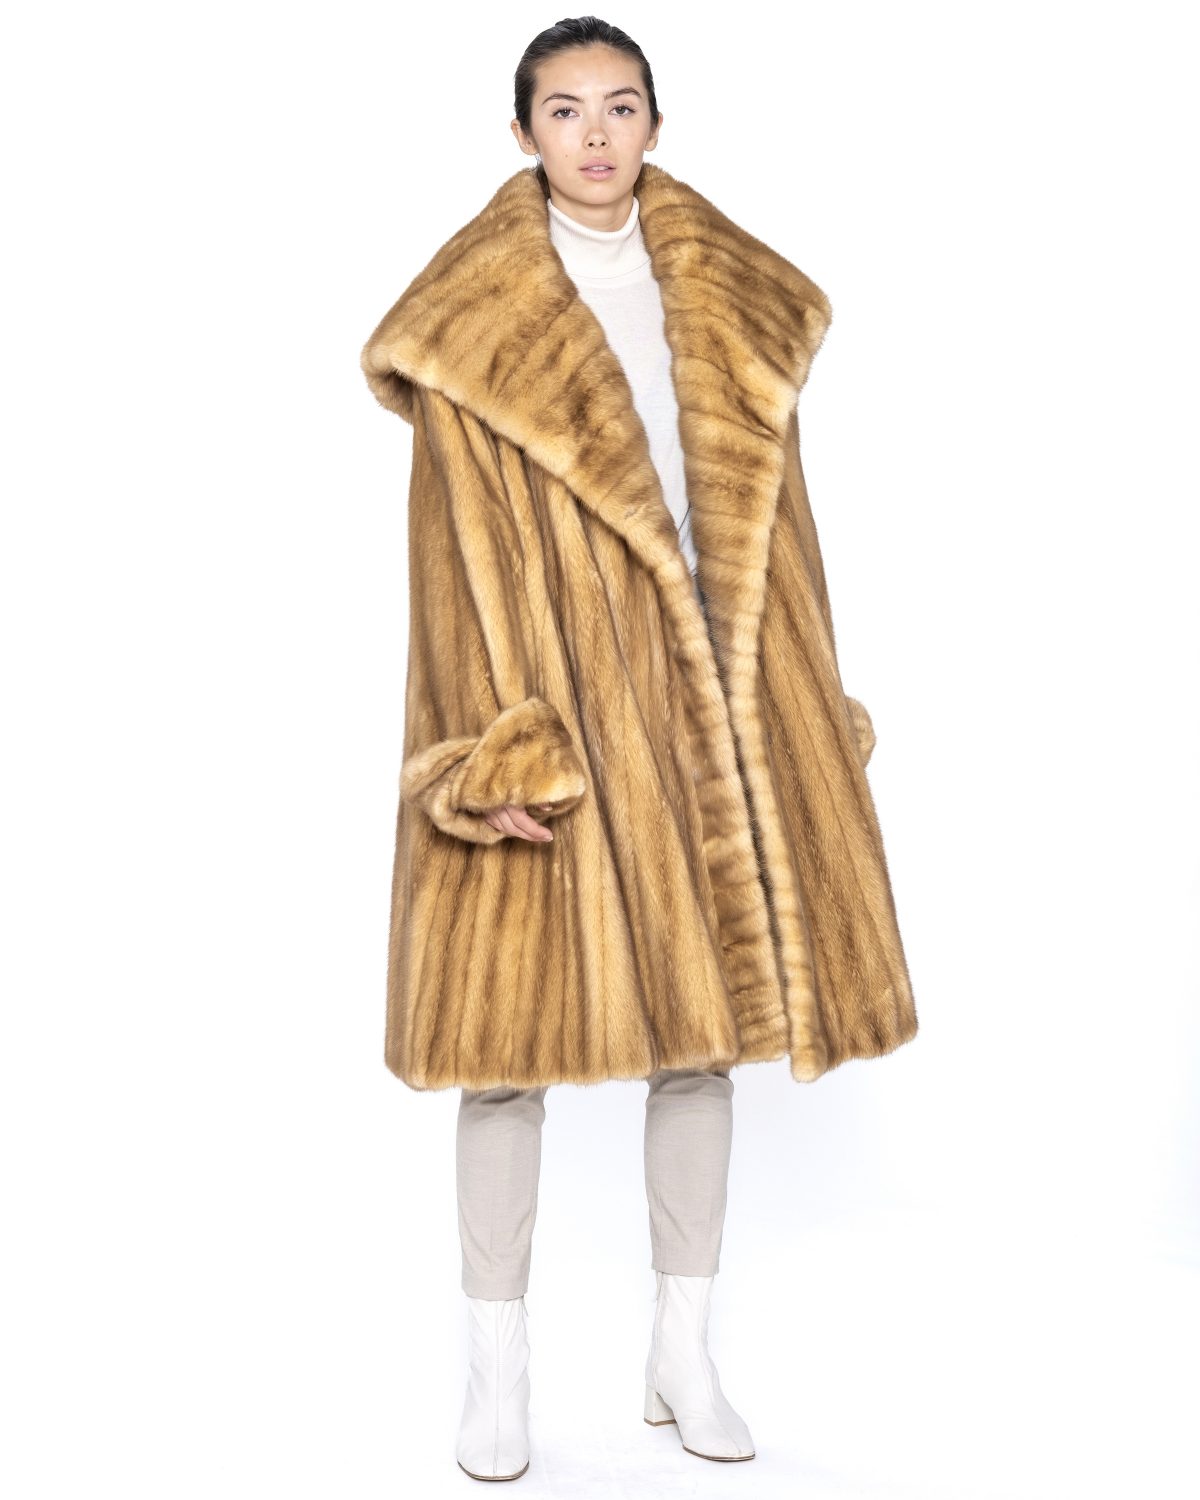 Fendi Designed Pre-Owned Bleached Whiskey Mink 7/8 Swing Coat Madison  Avenue Furs Henry Cowit,